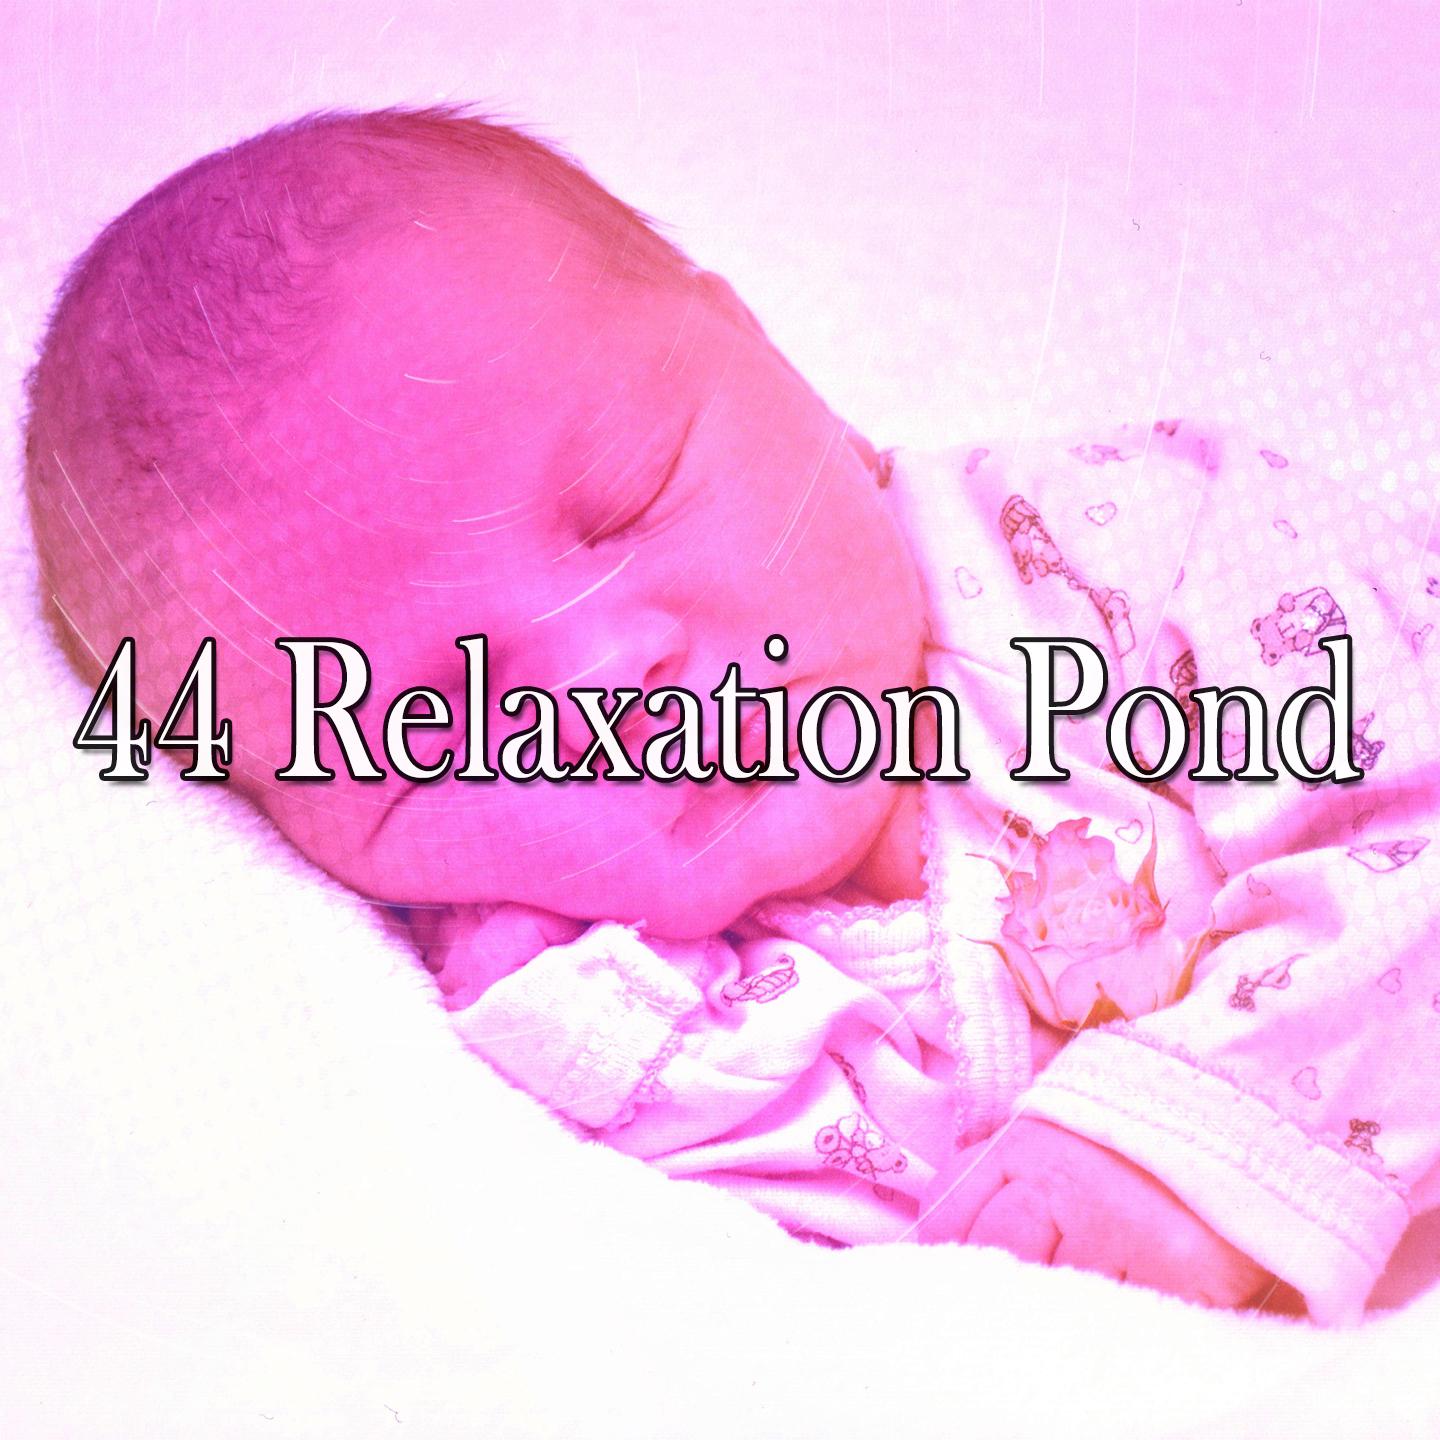 44 Relaxation Pond